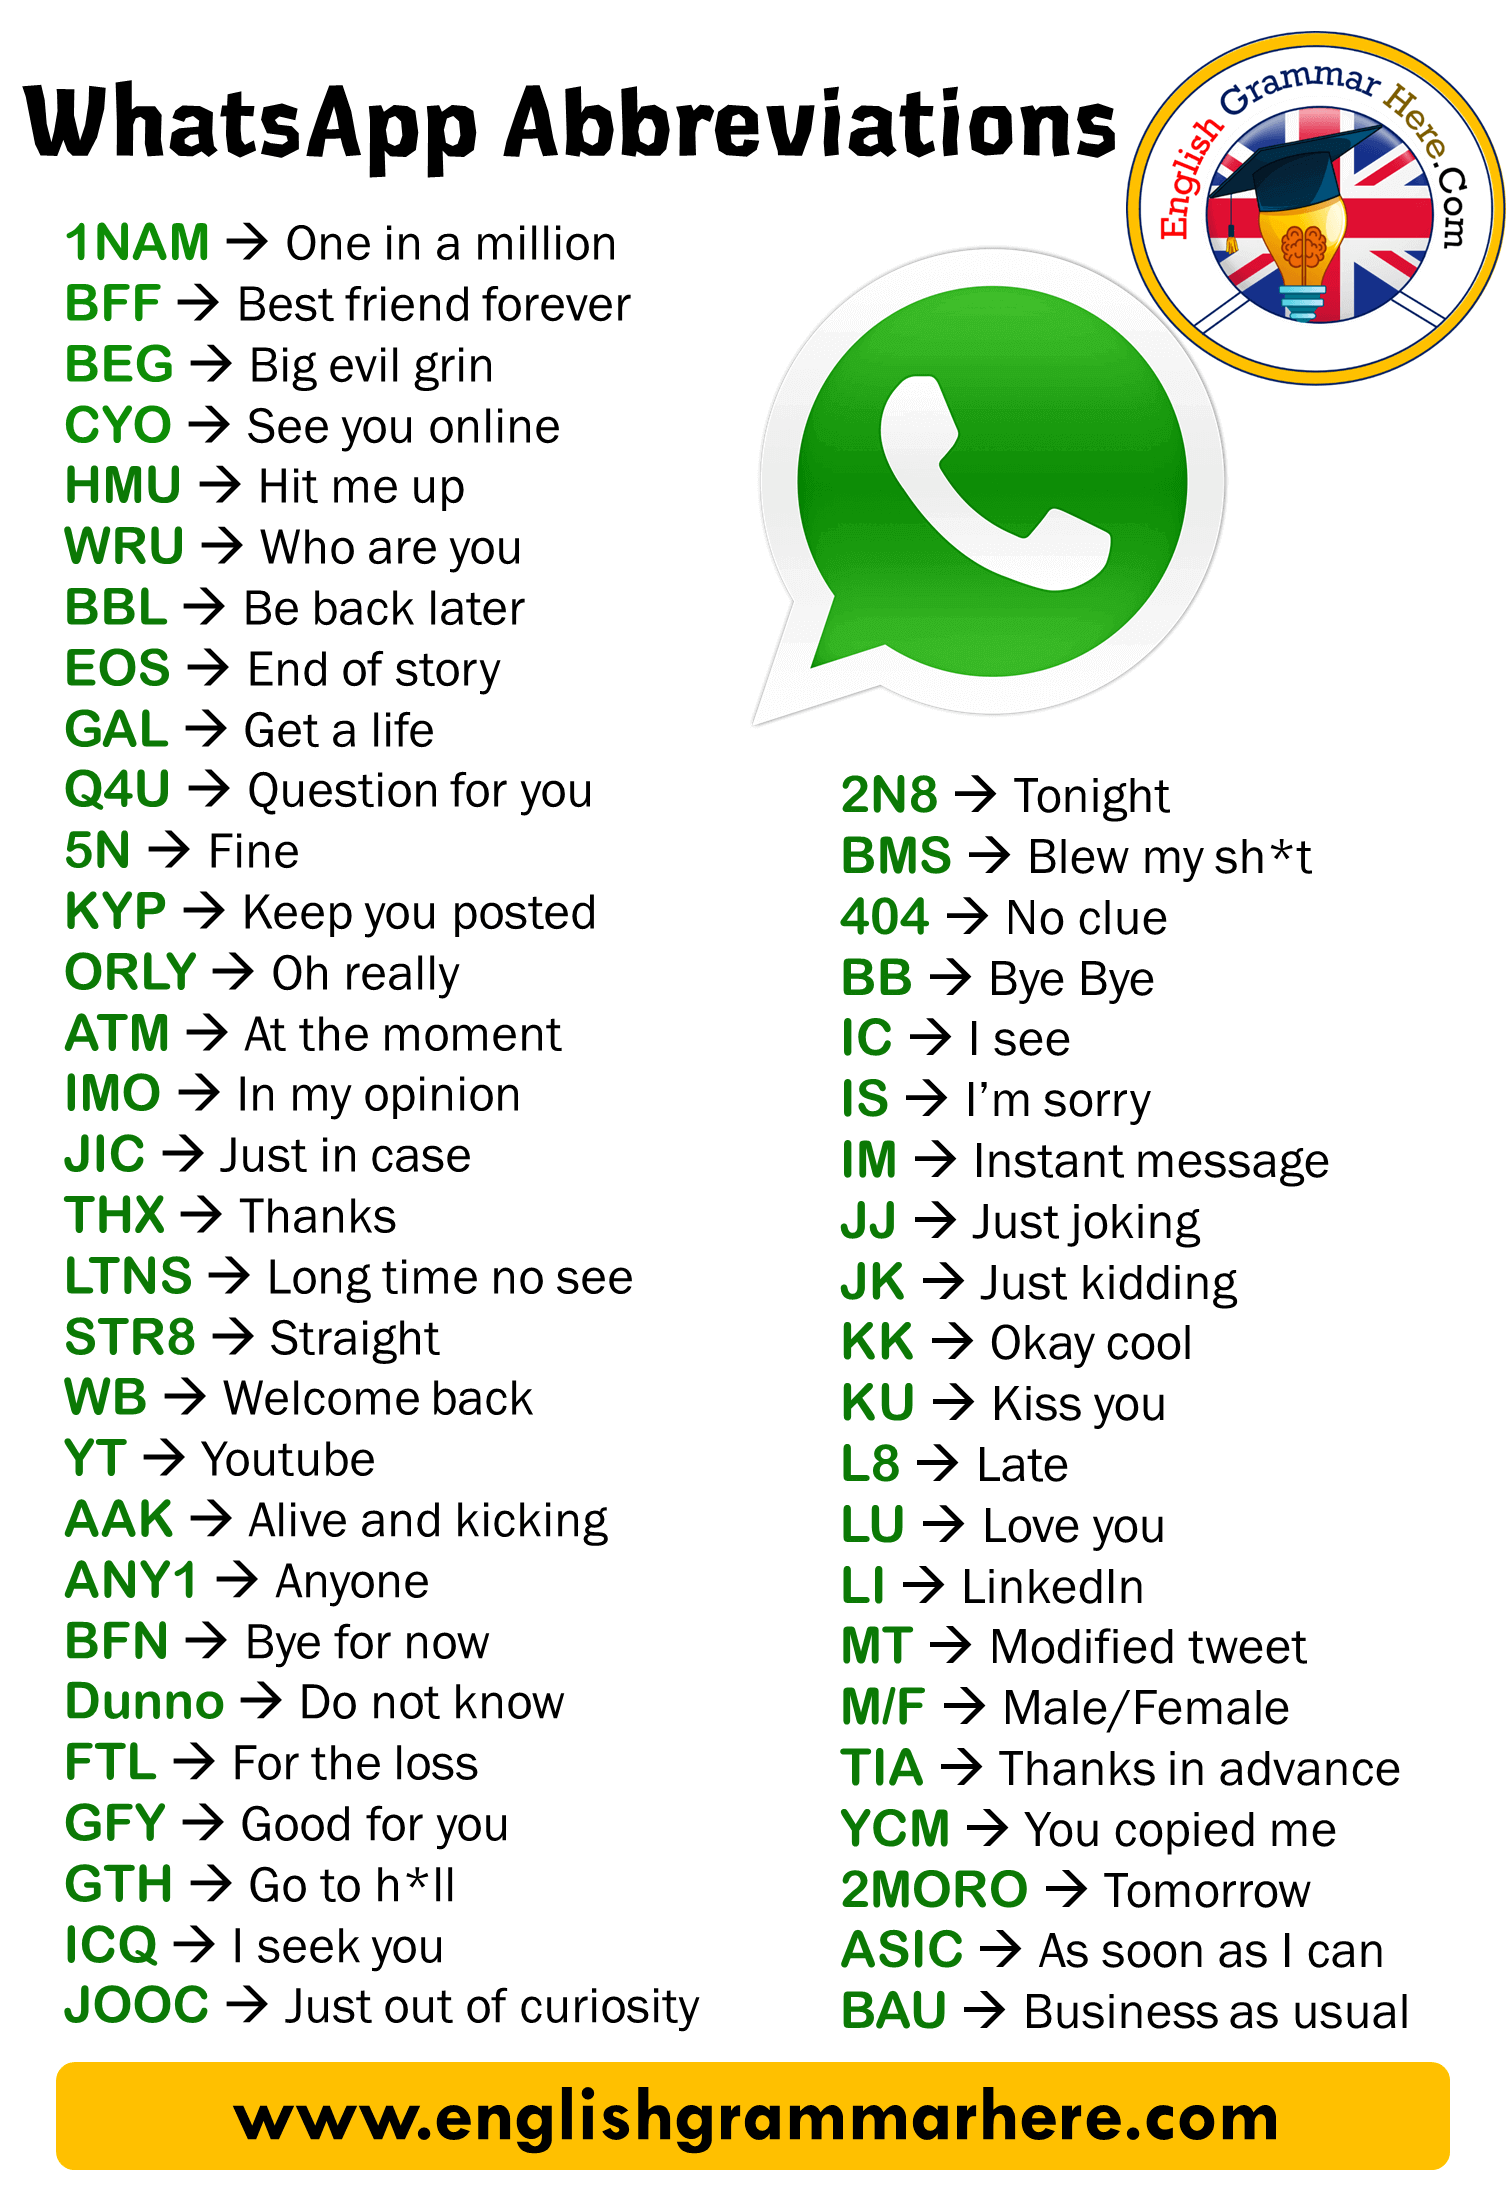 Short Forms of Words Used in Whatsapp - English Grammar Here